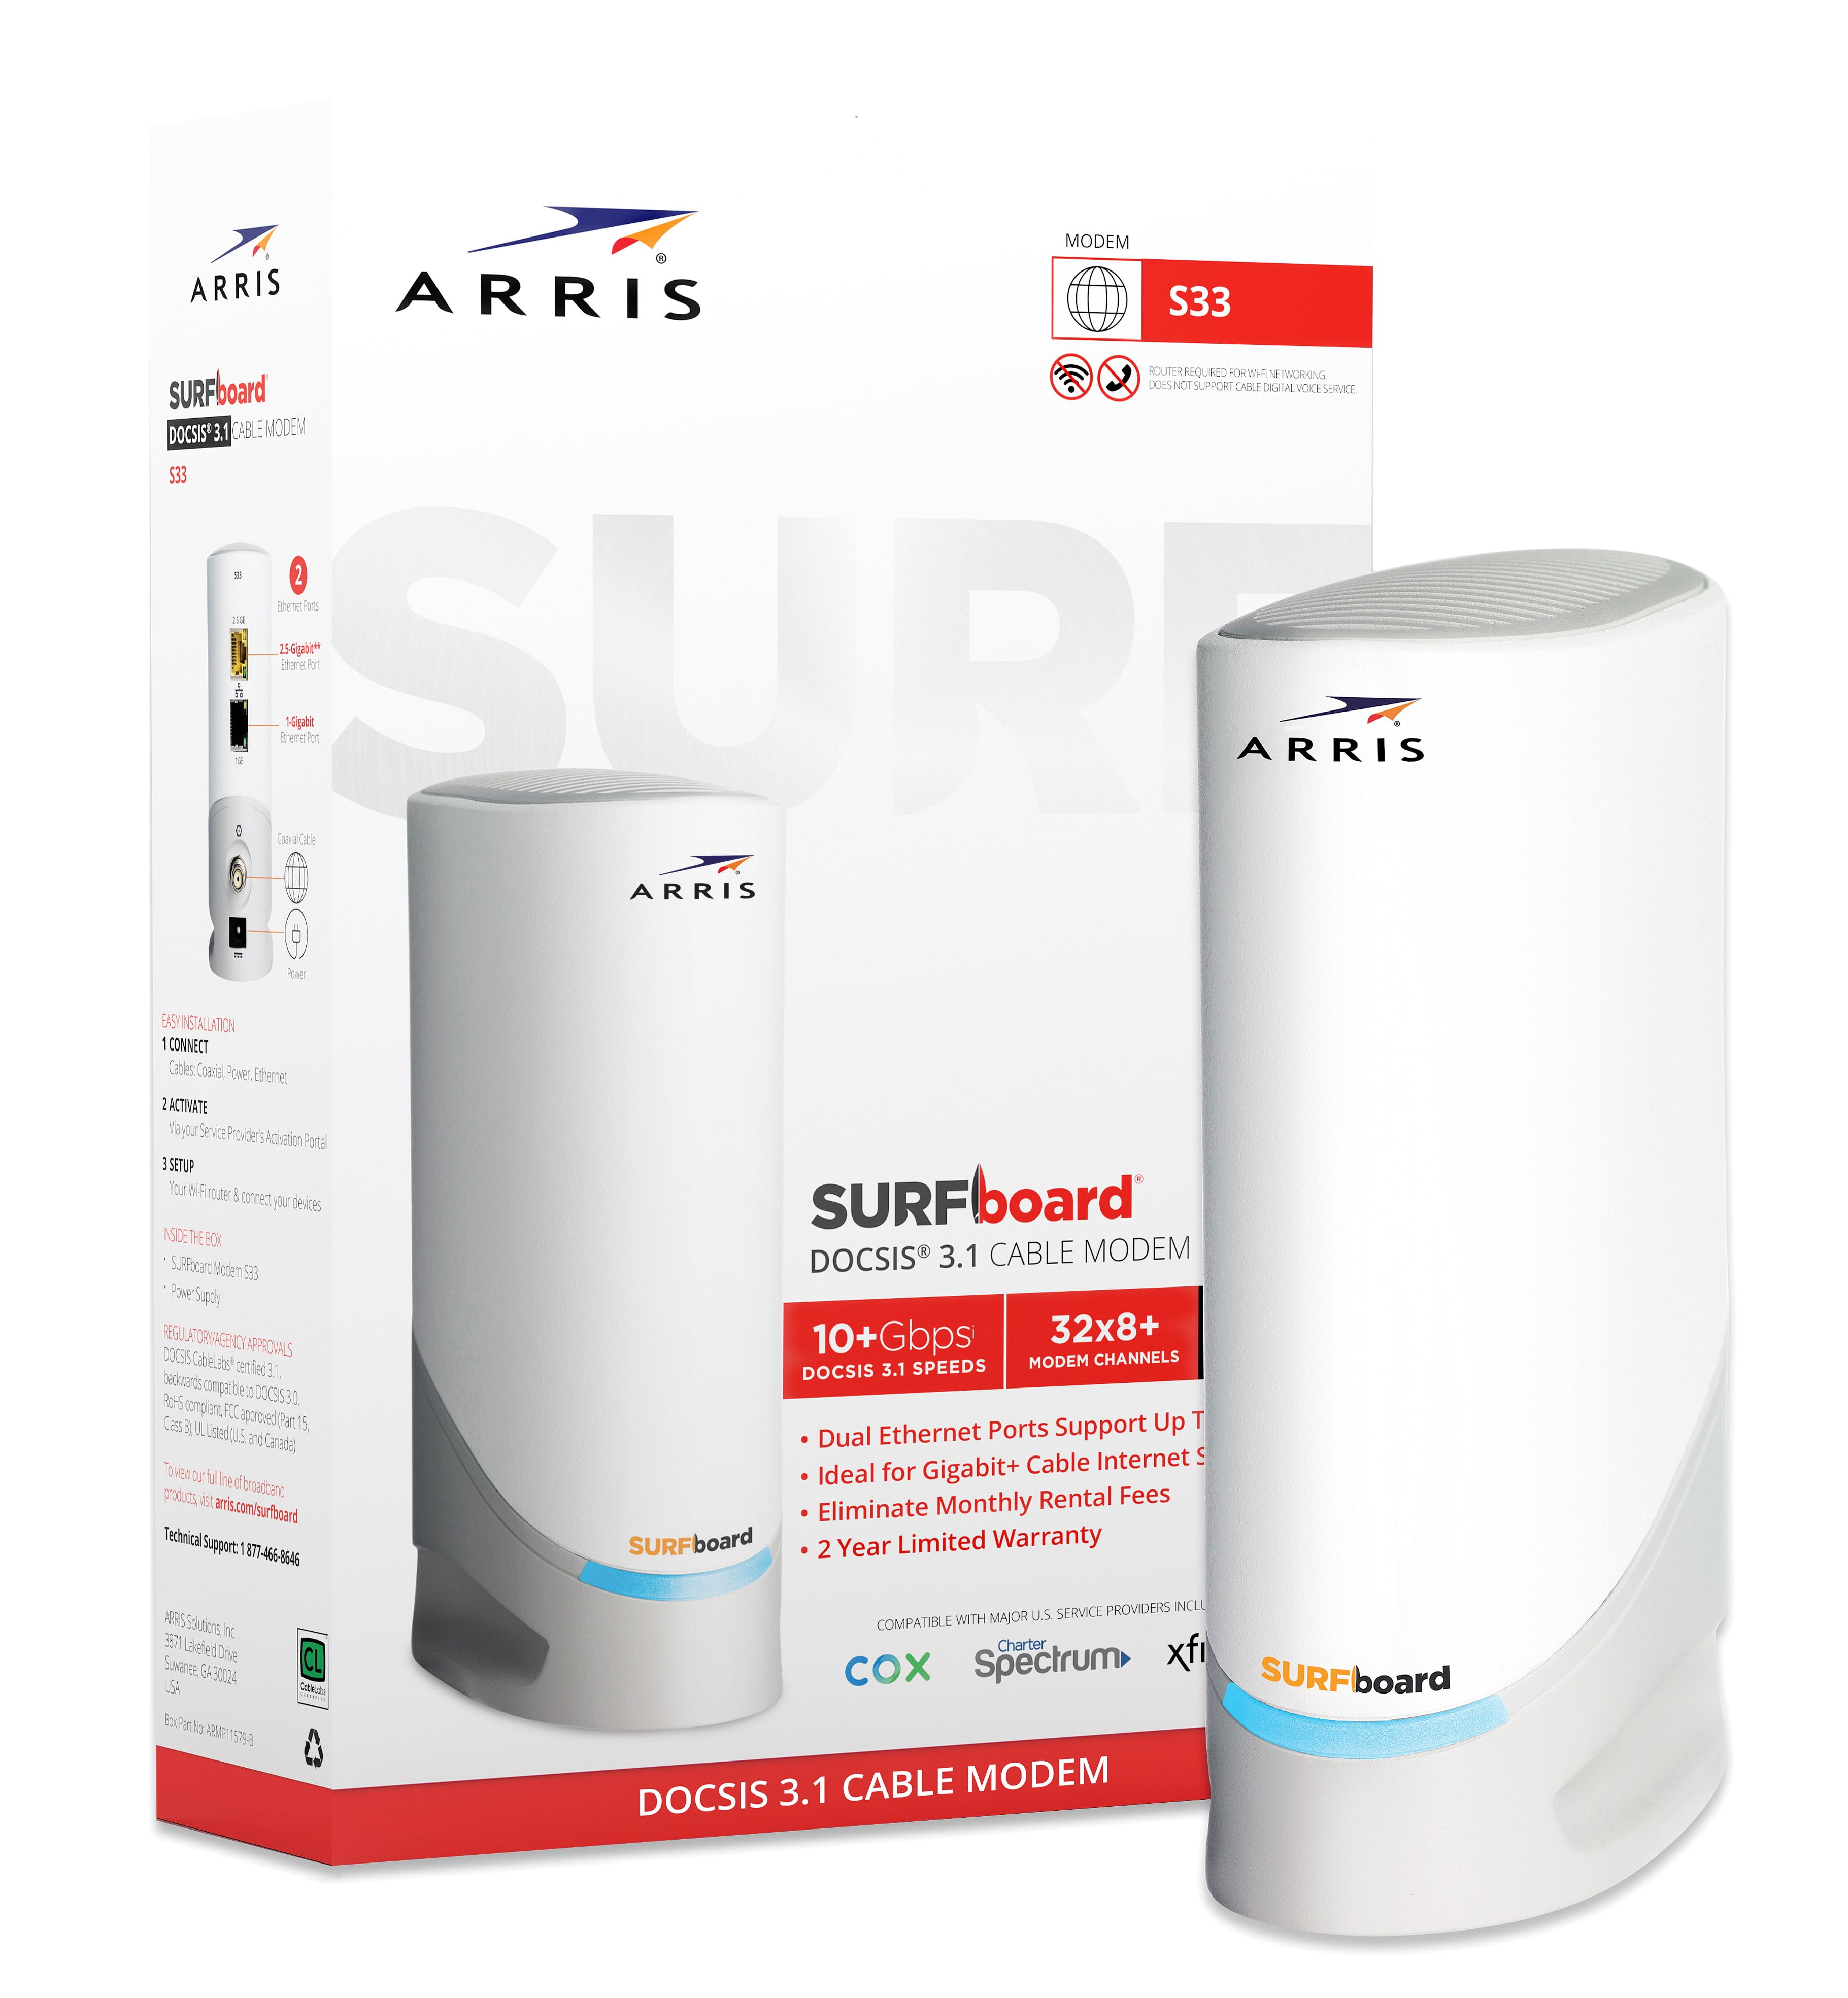 ARRIS SURFboard DOCSIS 3.1 Multi-Gigabit Cable Modem with 2.5 Gbps Ethernet Port, Approved for Cox, Xfinity, Spectrum and Others